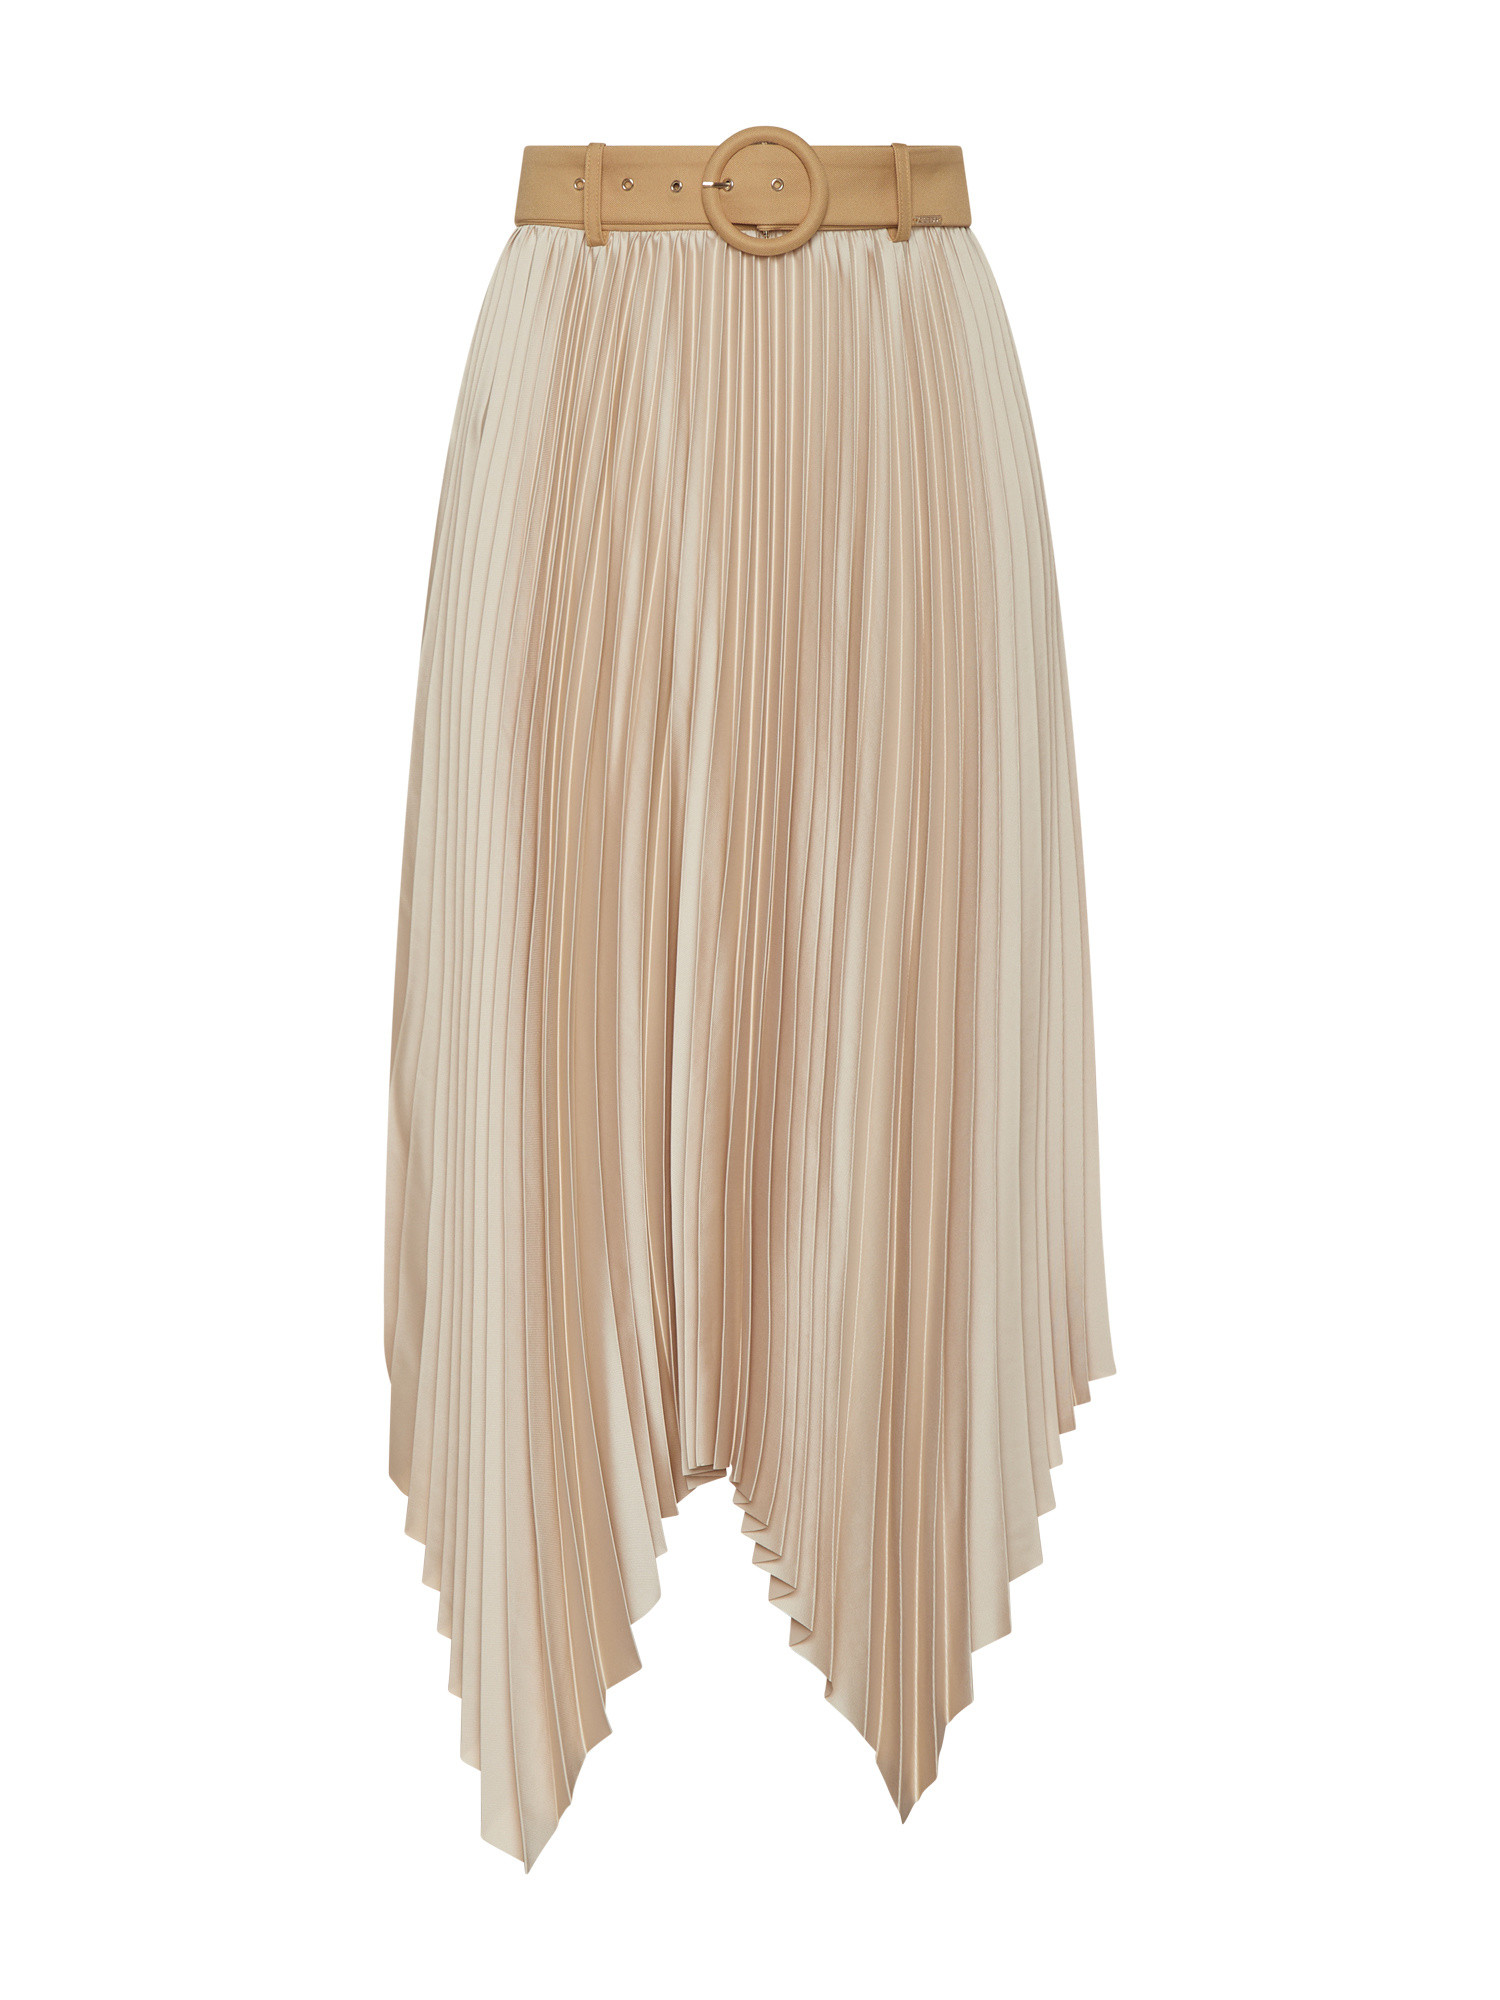 Guess - Asymmetric pleated skirt, Cream, large image number 0